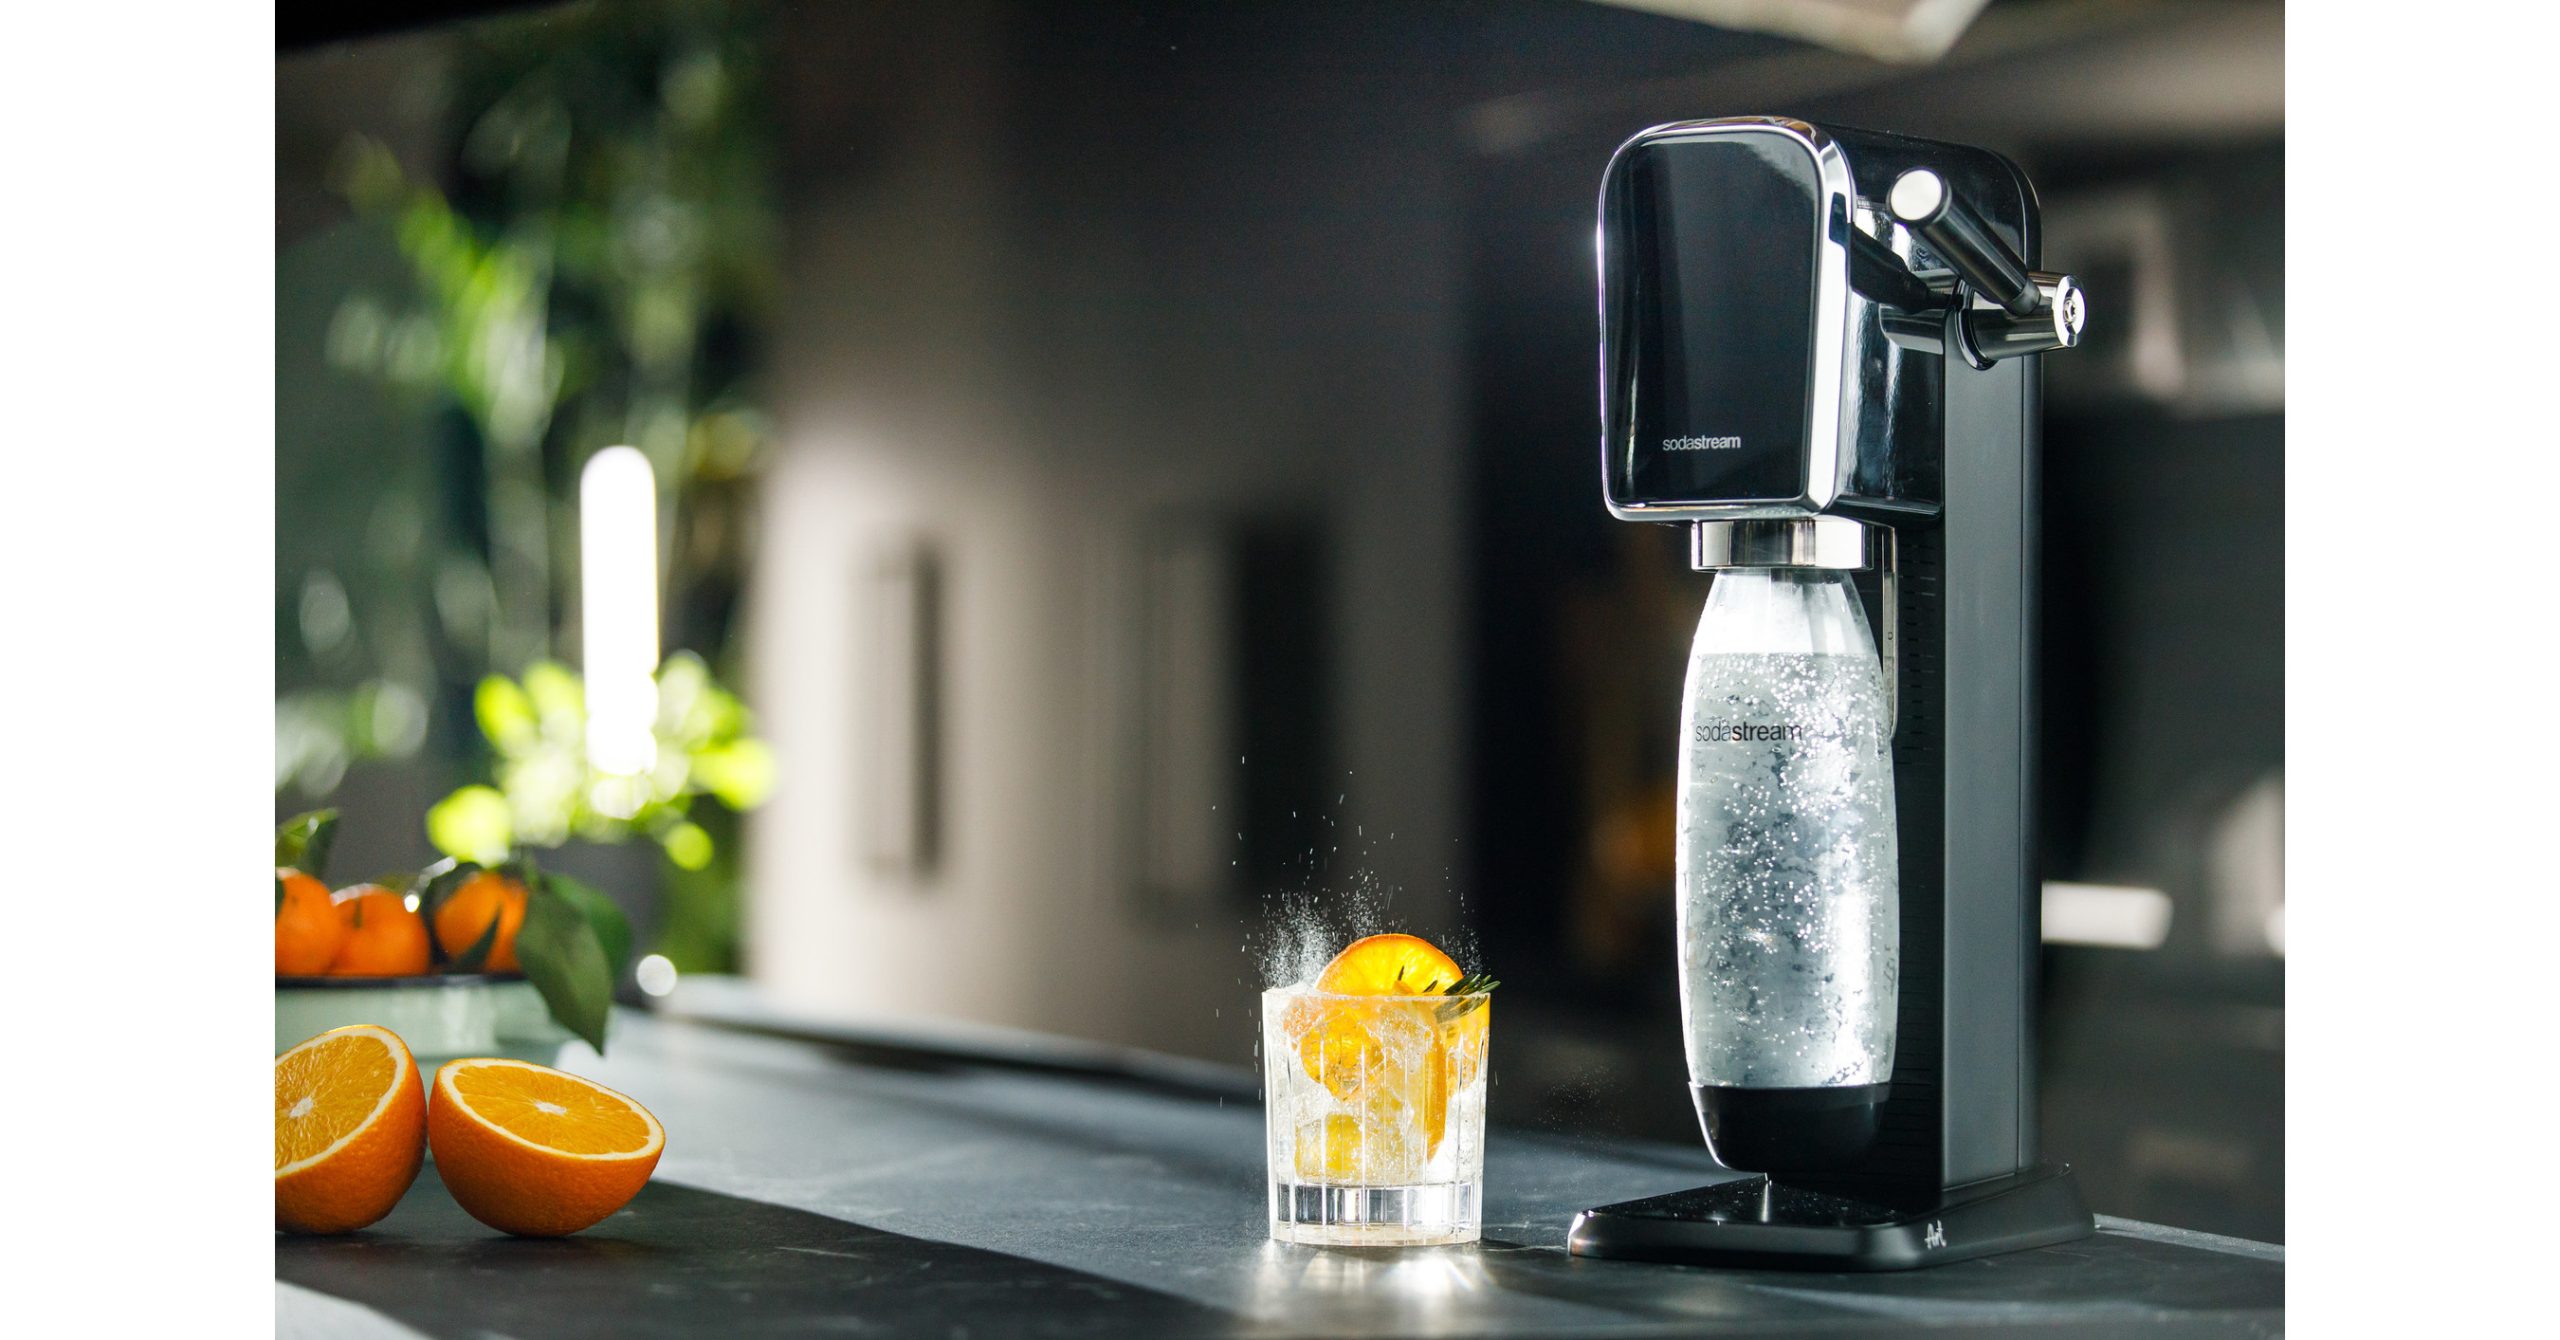 SodaStream launches the next generation of sparkling water makers in Canada

